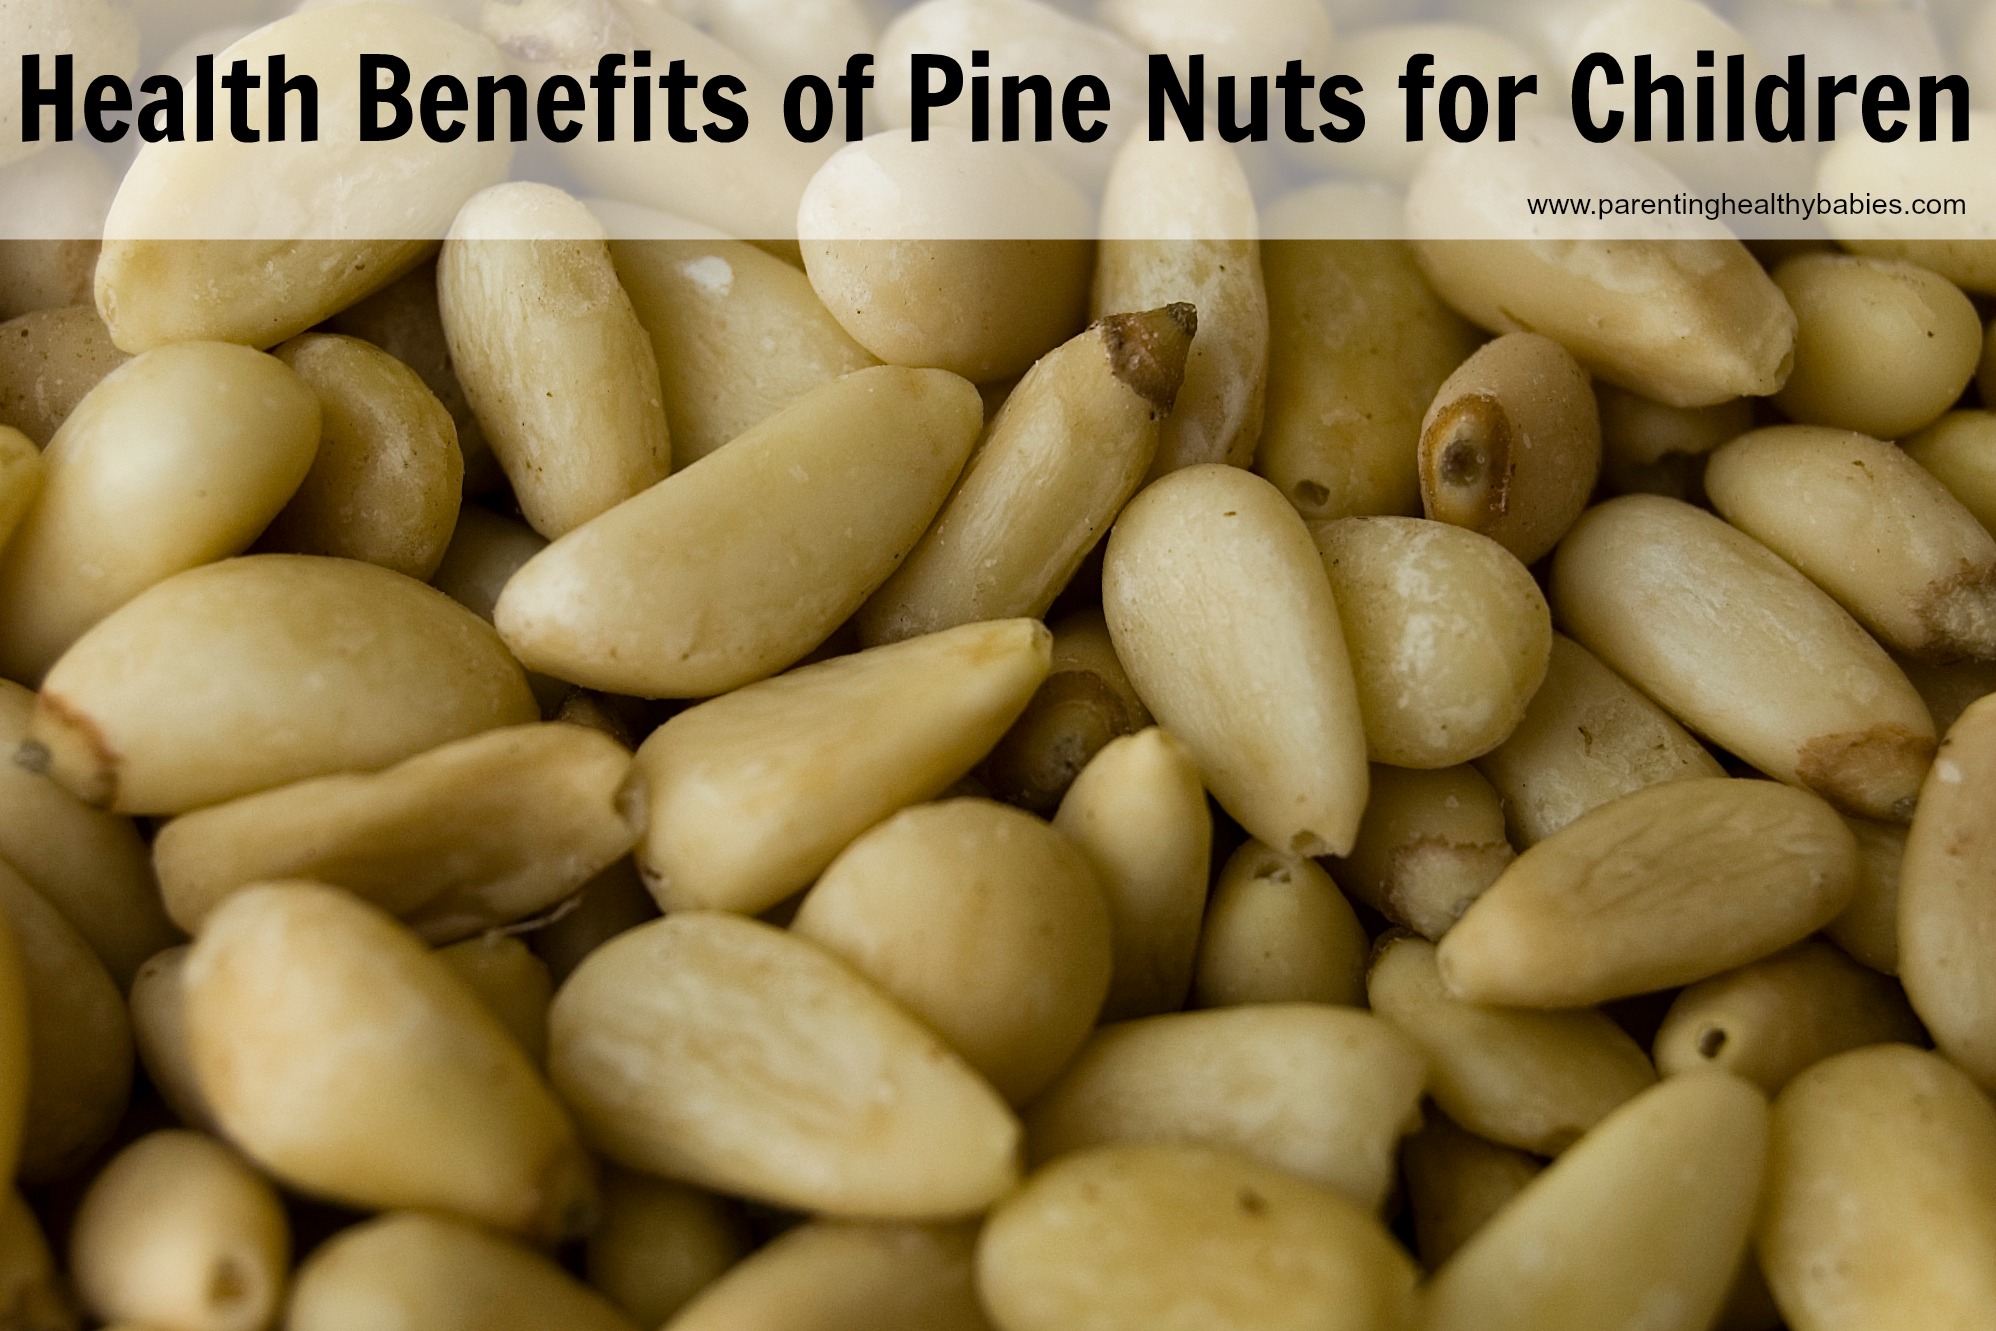 Health Benefits of Pine Nuts for Kids